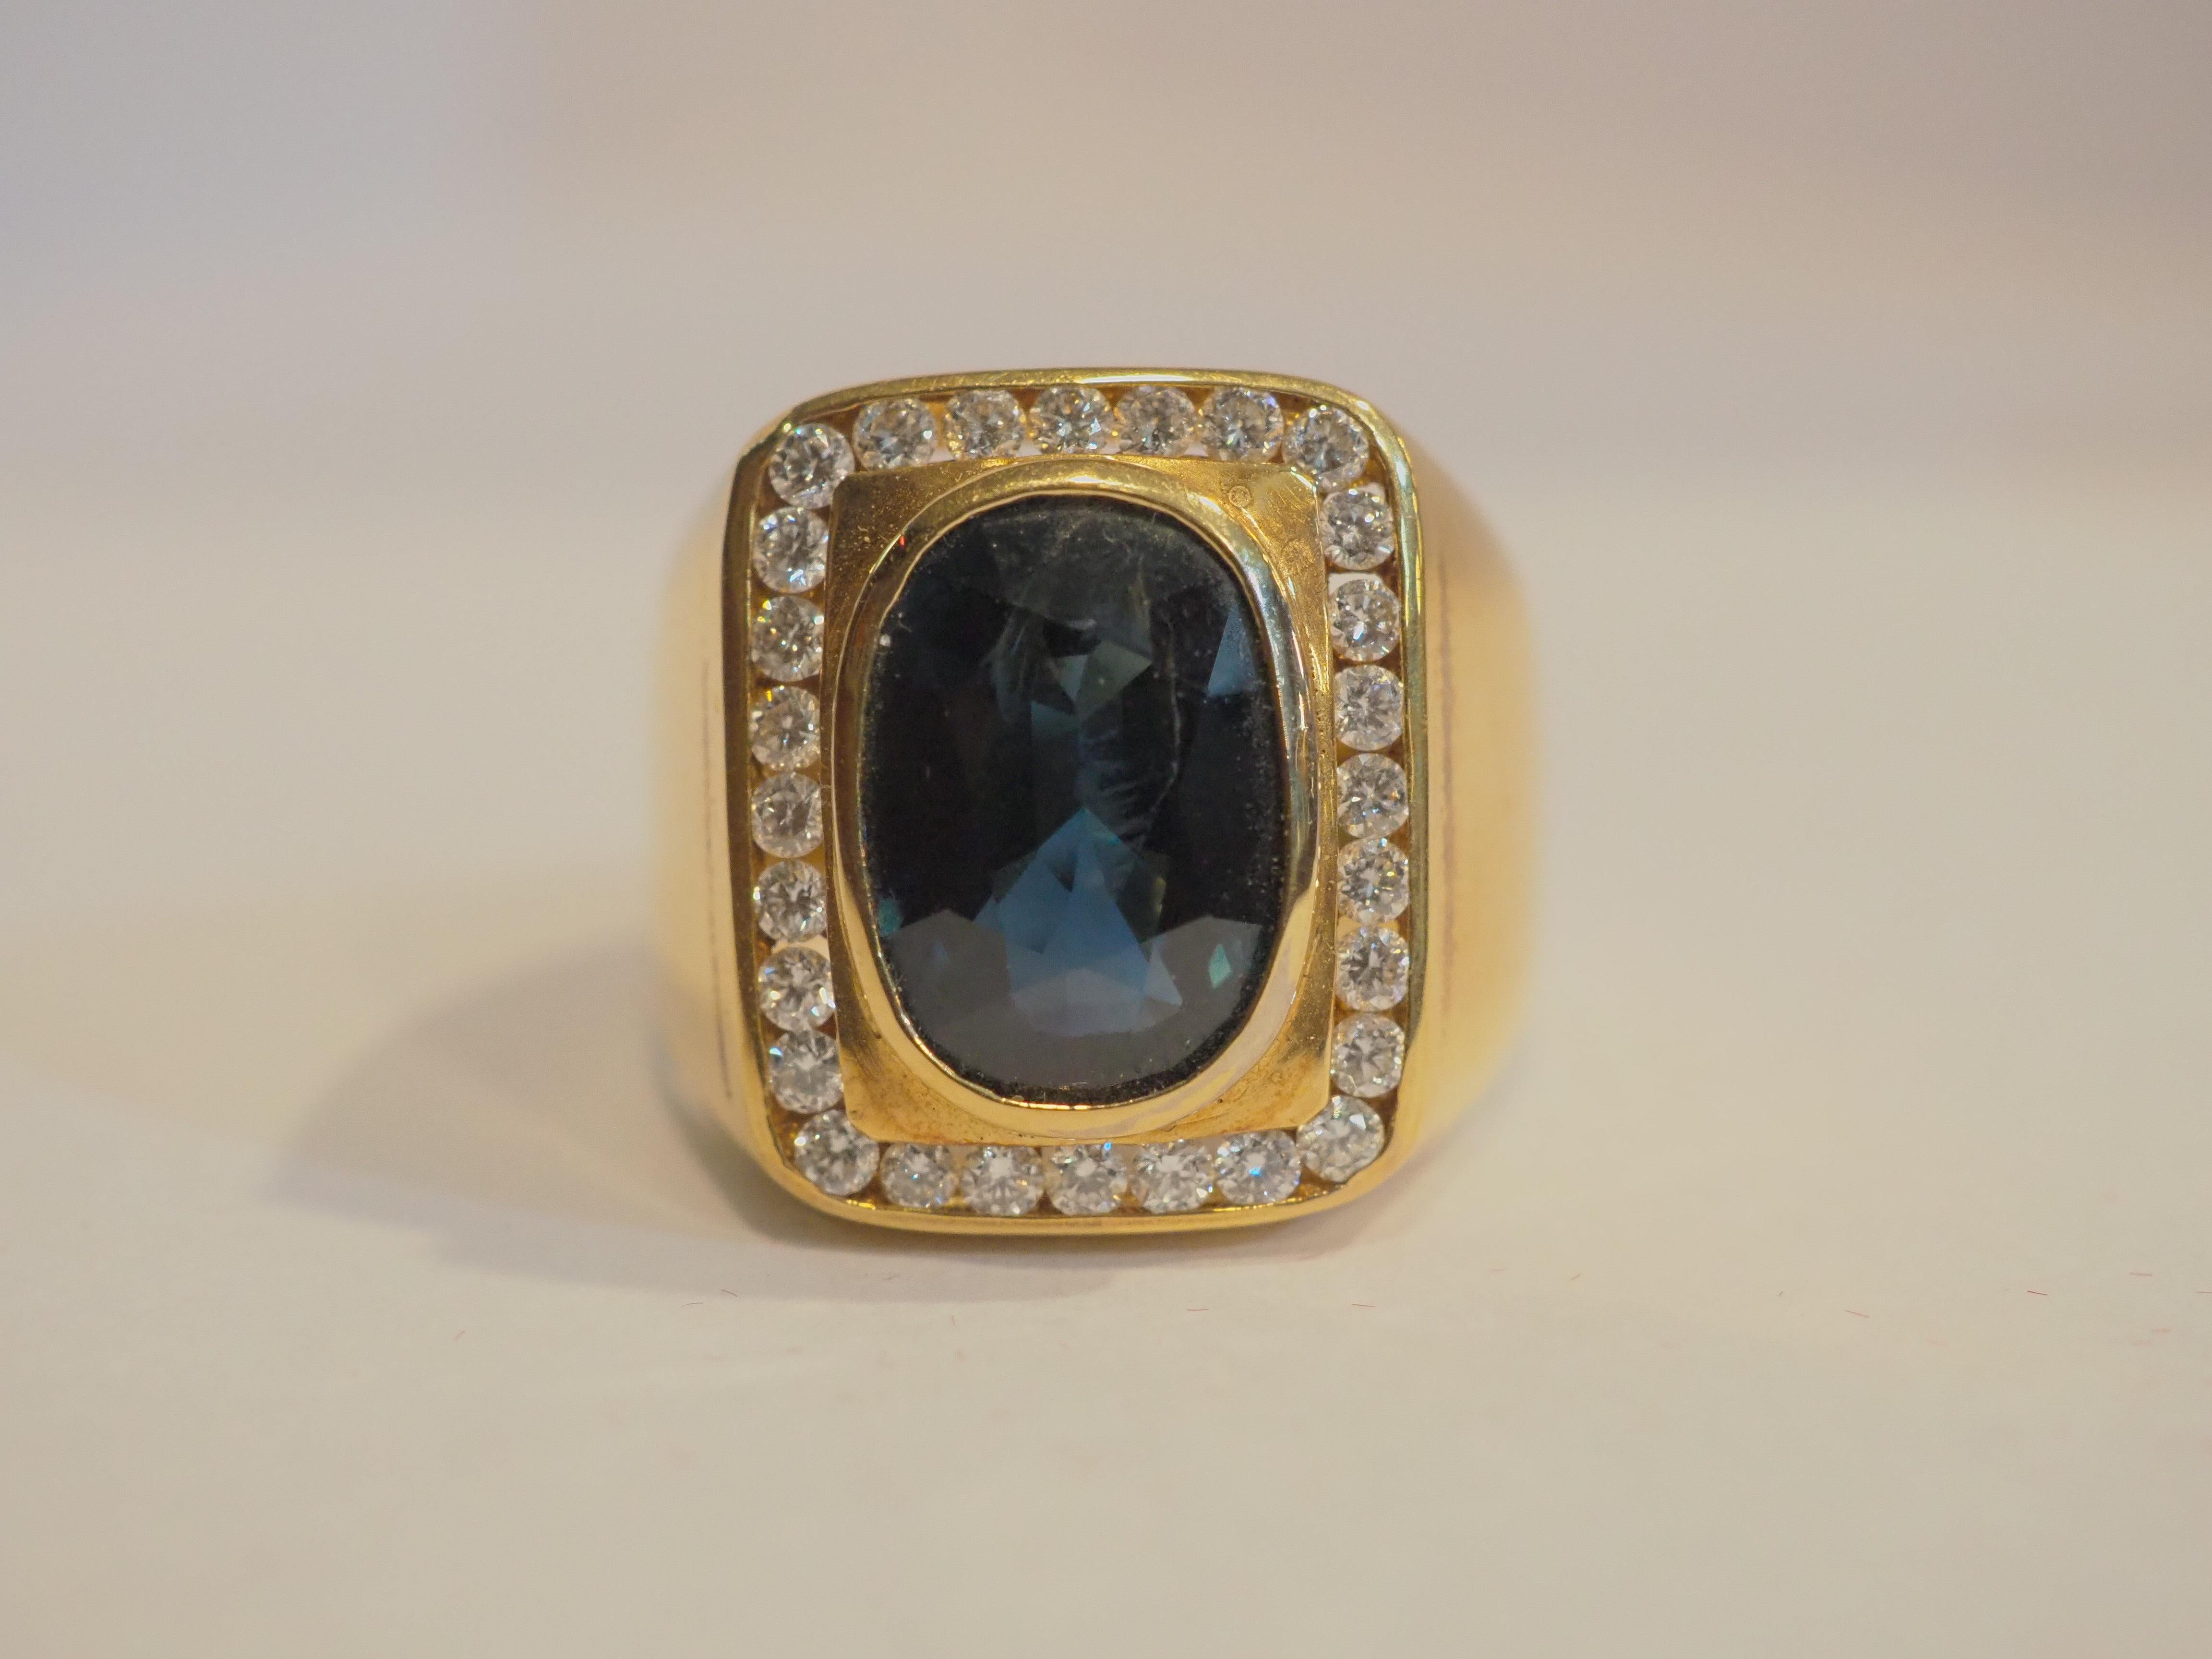  This fantastic cocktail piece is a beautiful 18K yellow gold fine signet ring for man. It features a decent size oval deep blue sapphire as the main gemstone. There is fire and brilliance in the sapphire which is incredible. There are multiple